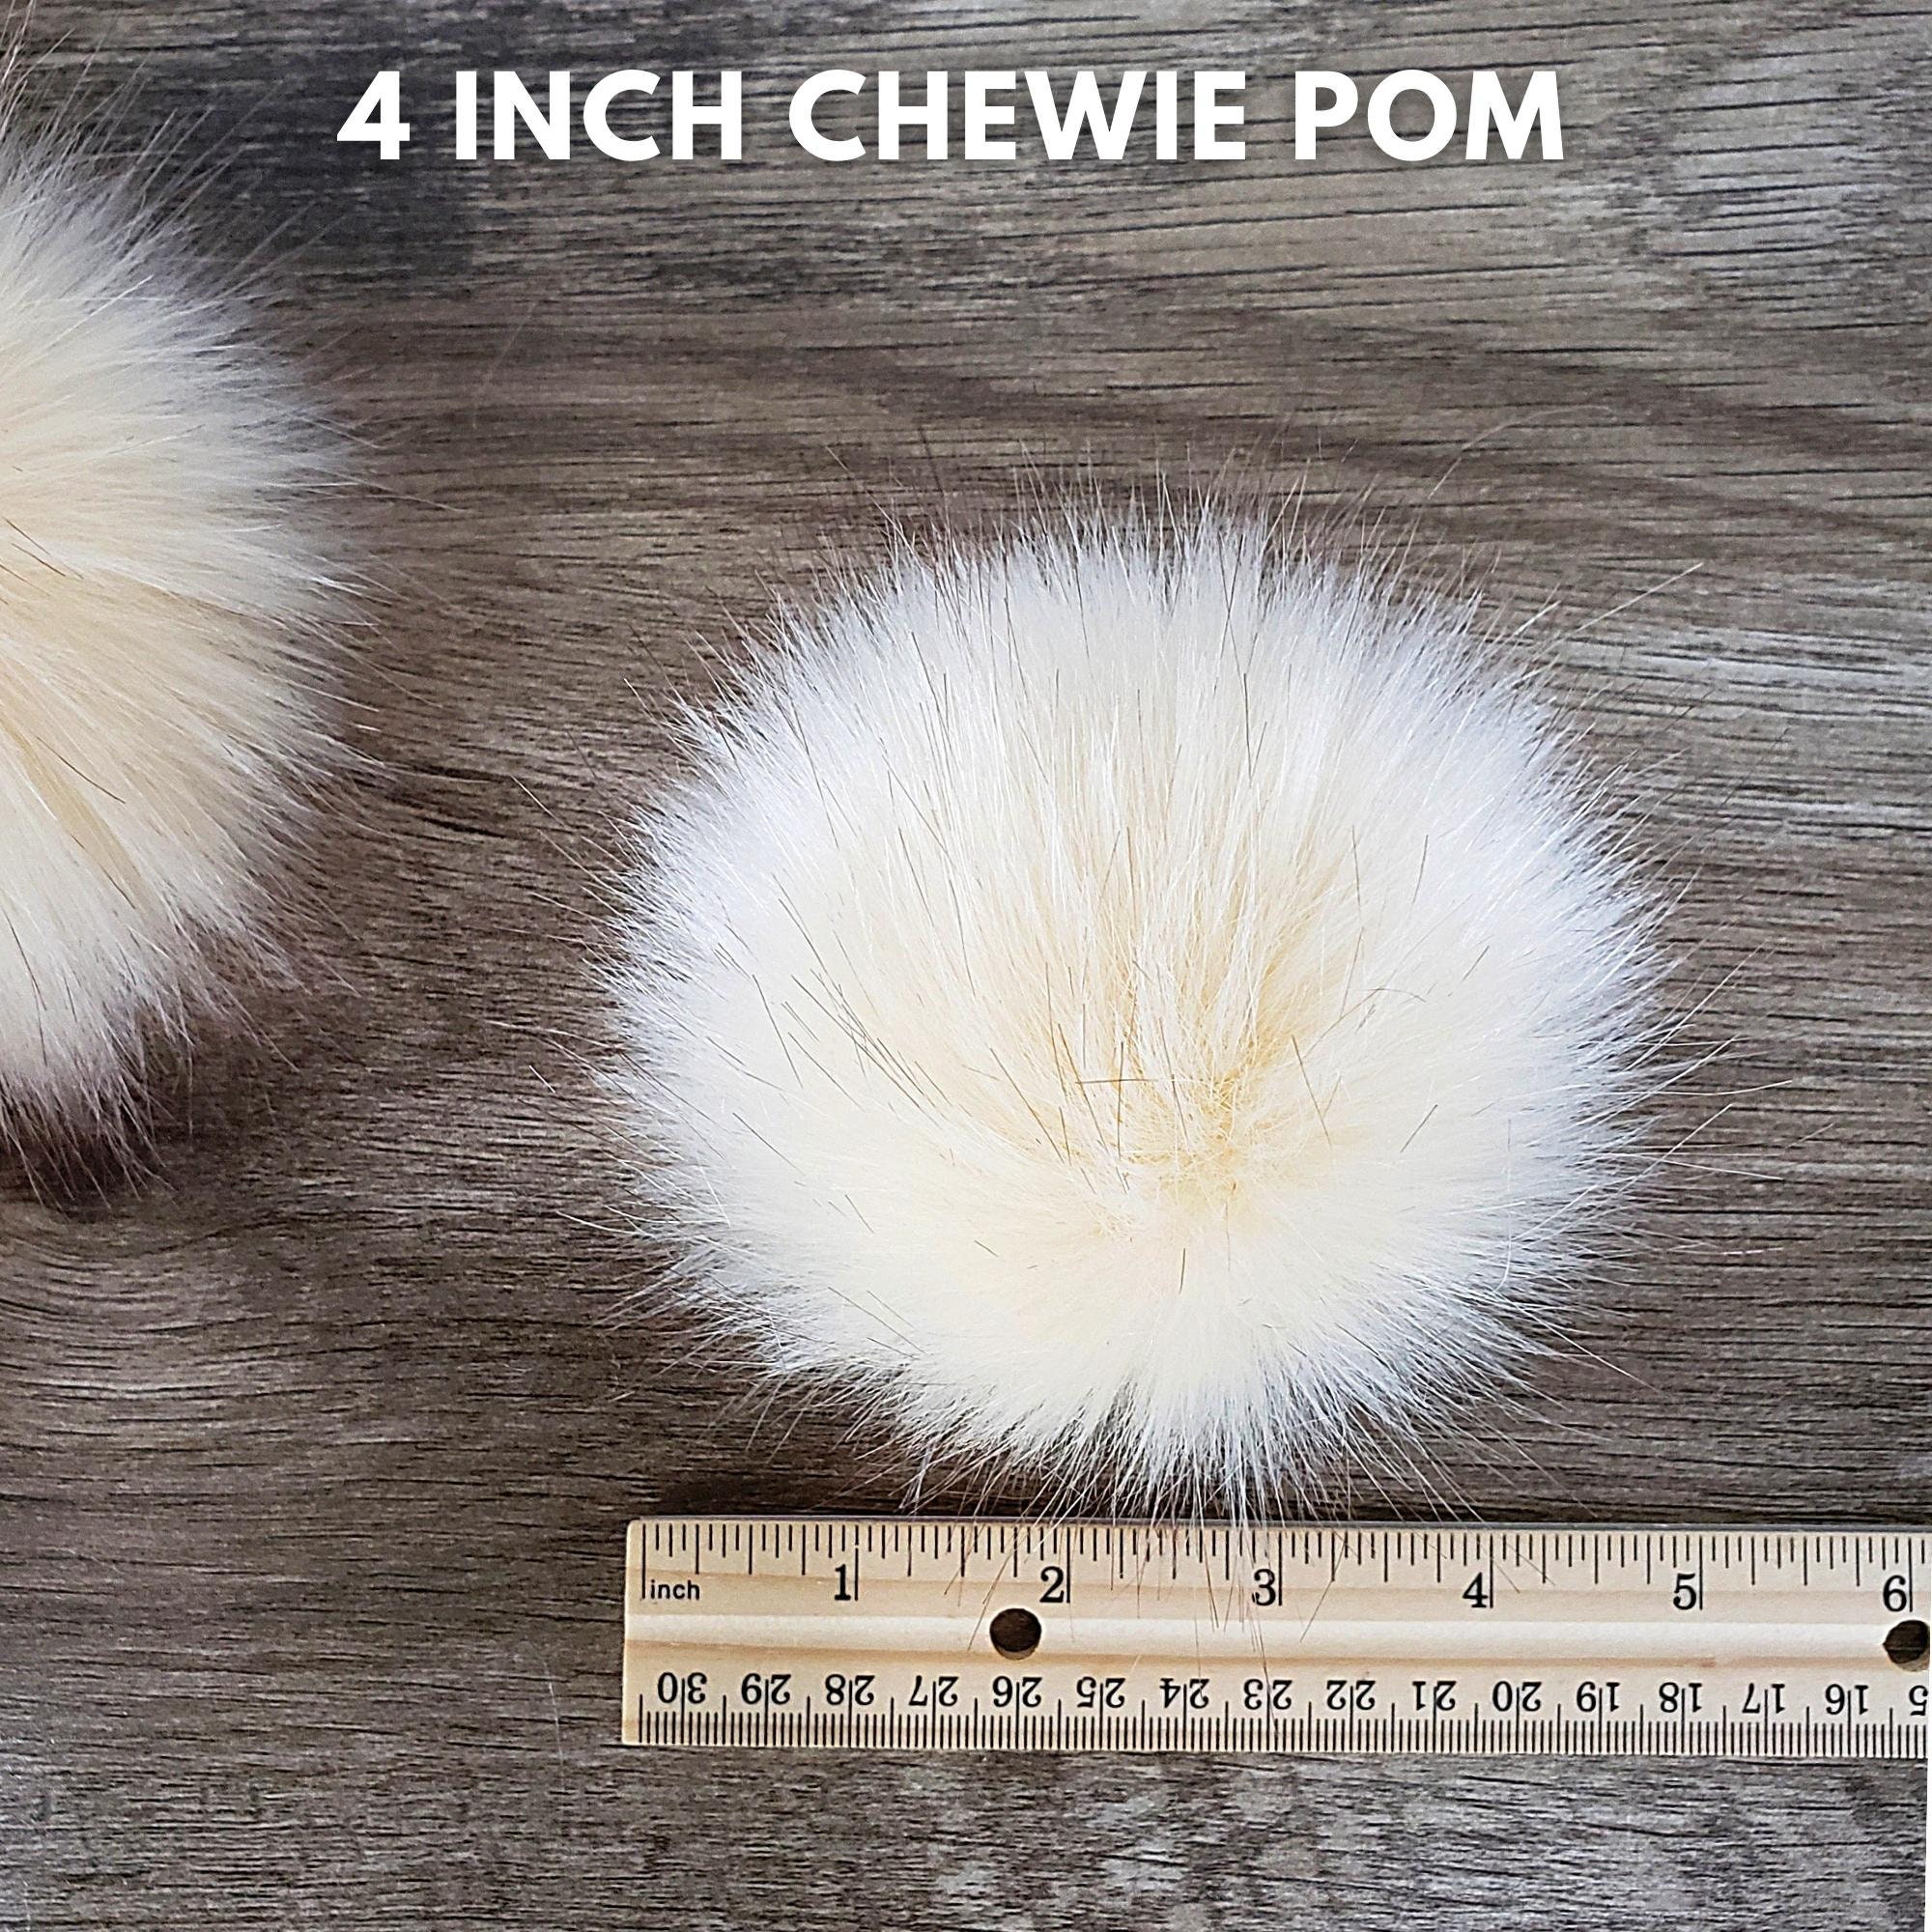 Custom Size Orchid Faux Fur Pom Poms for Crochet Crafts Hats and Beanies  Light Pastel Purple Pompom With Button Snap Ties or Loop 3 6 Inch 